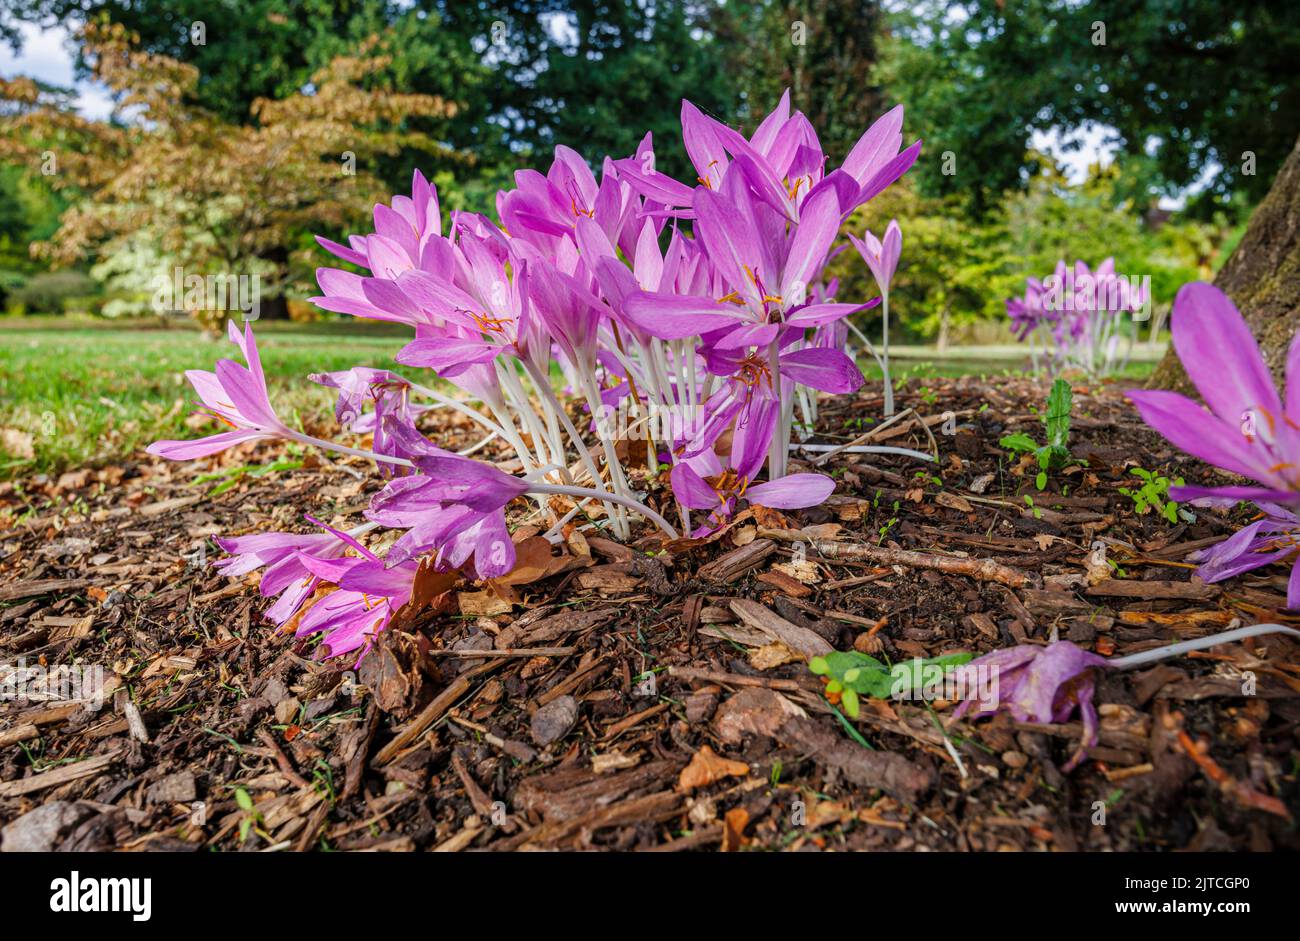 Delicate purple Colchicum giganteum 'Giant' (autumn crocus) in flower in late summer to early autumn in RHS Garden, Wisely, Surrey, south-east England Stock Photo